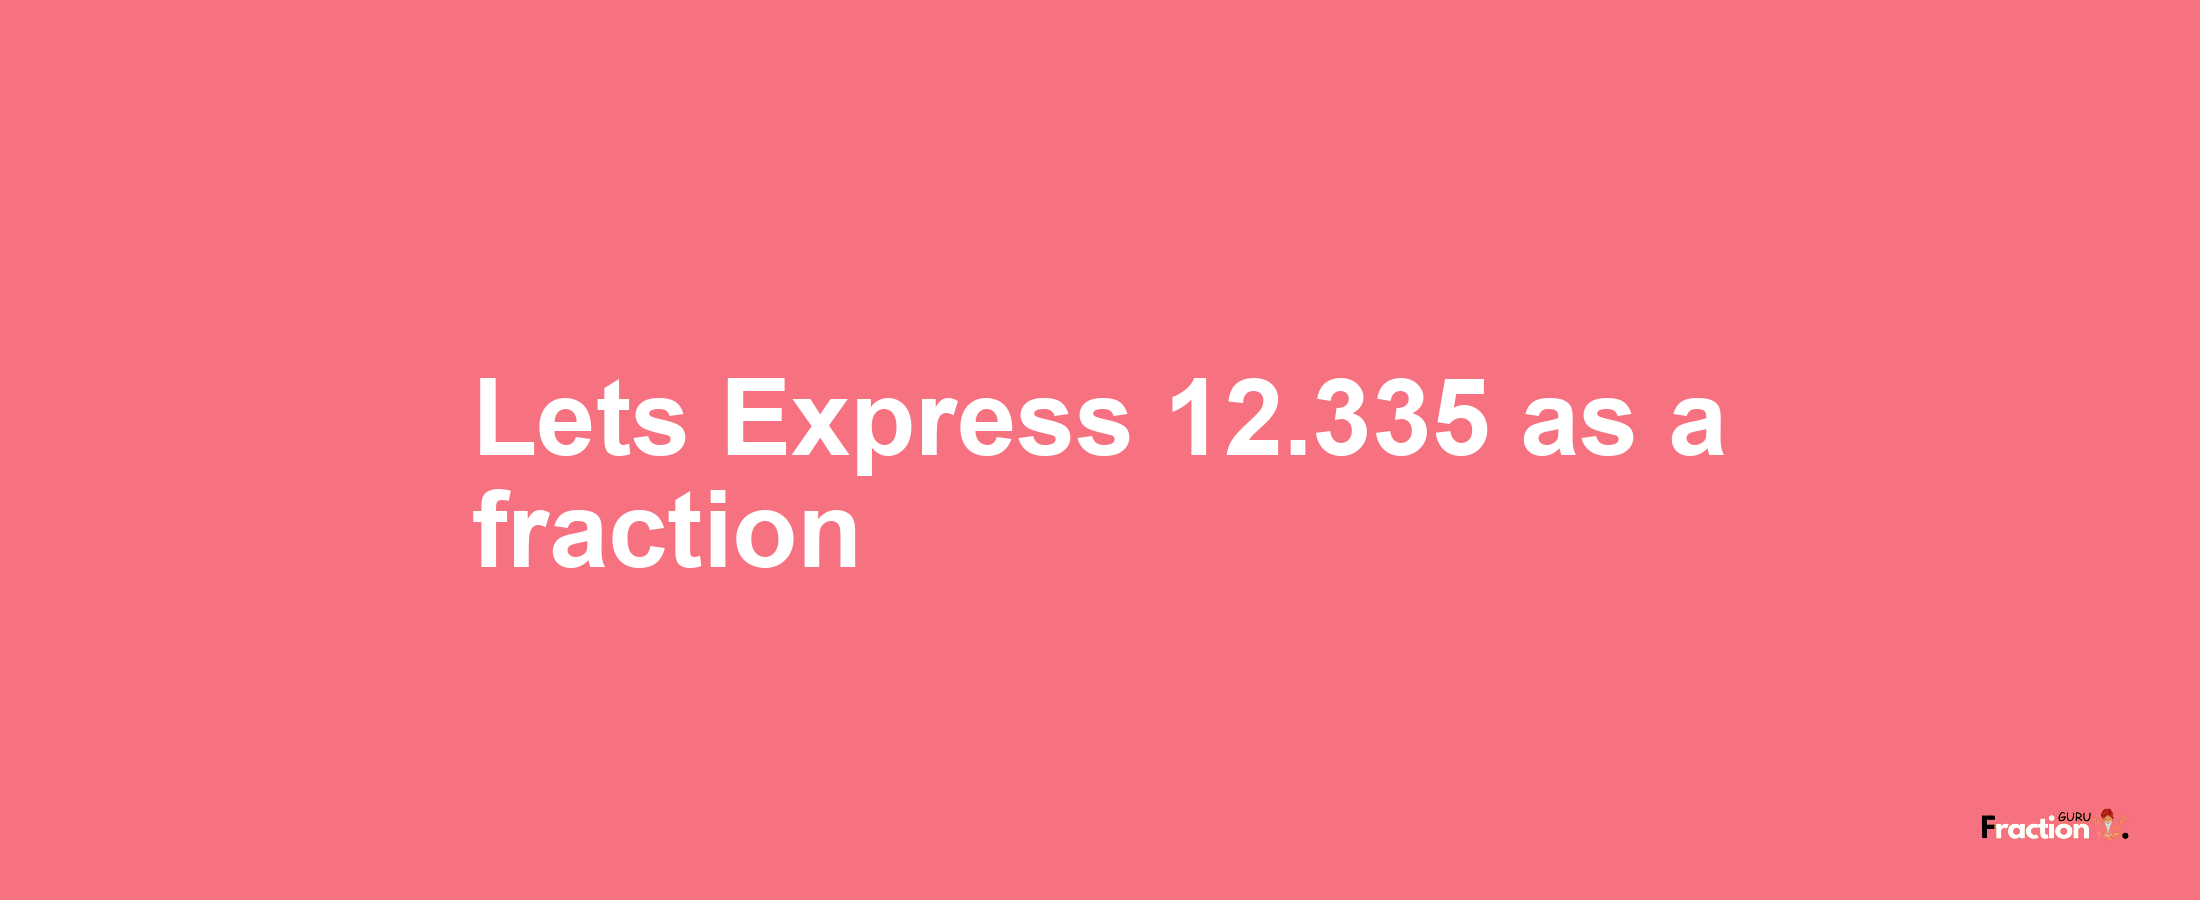 Lets Express 12.335 as afraction